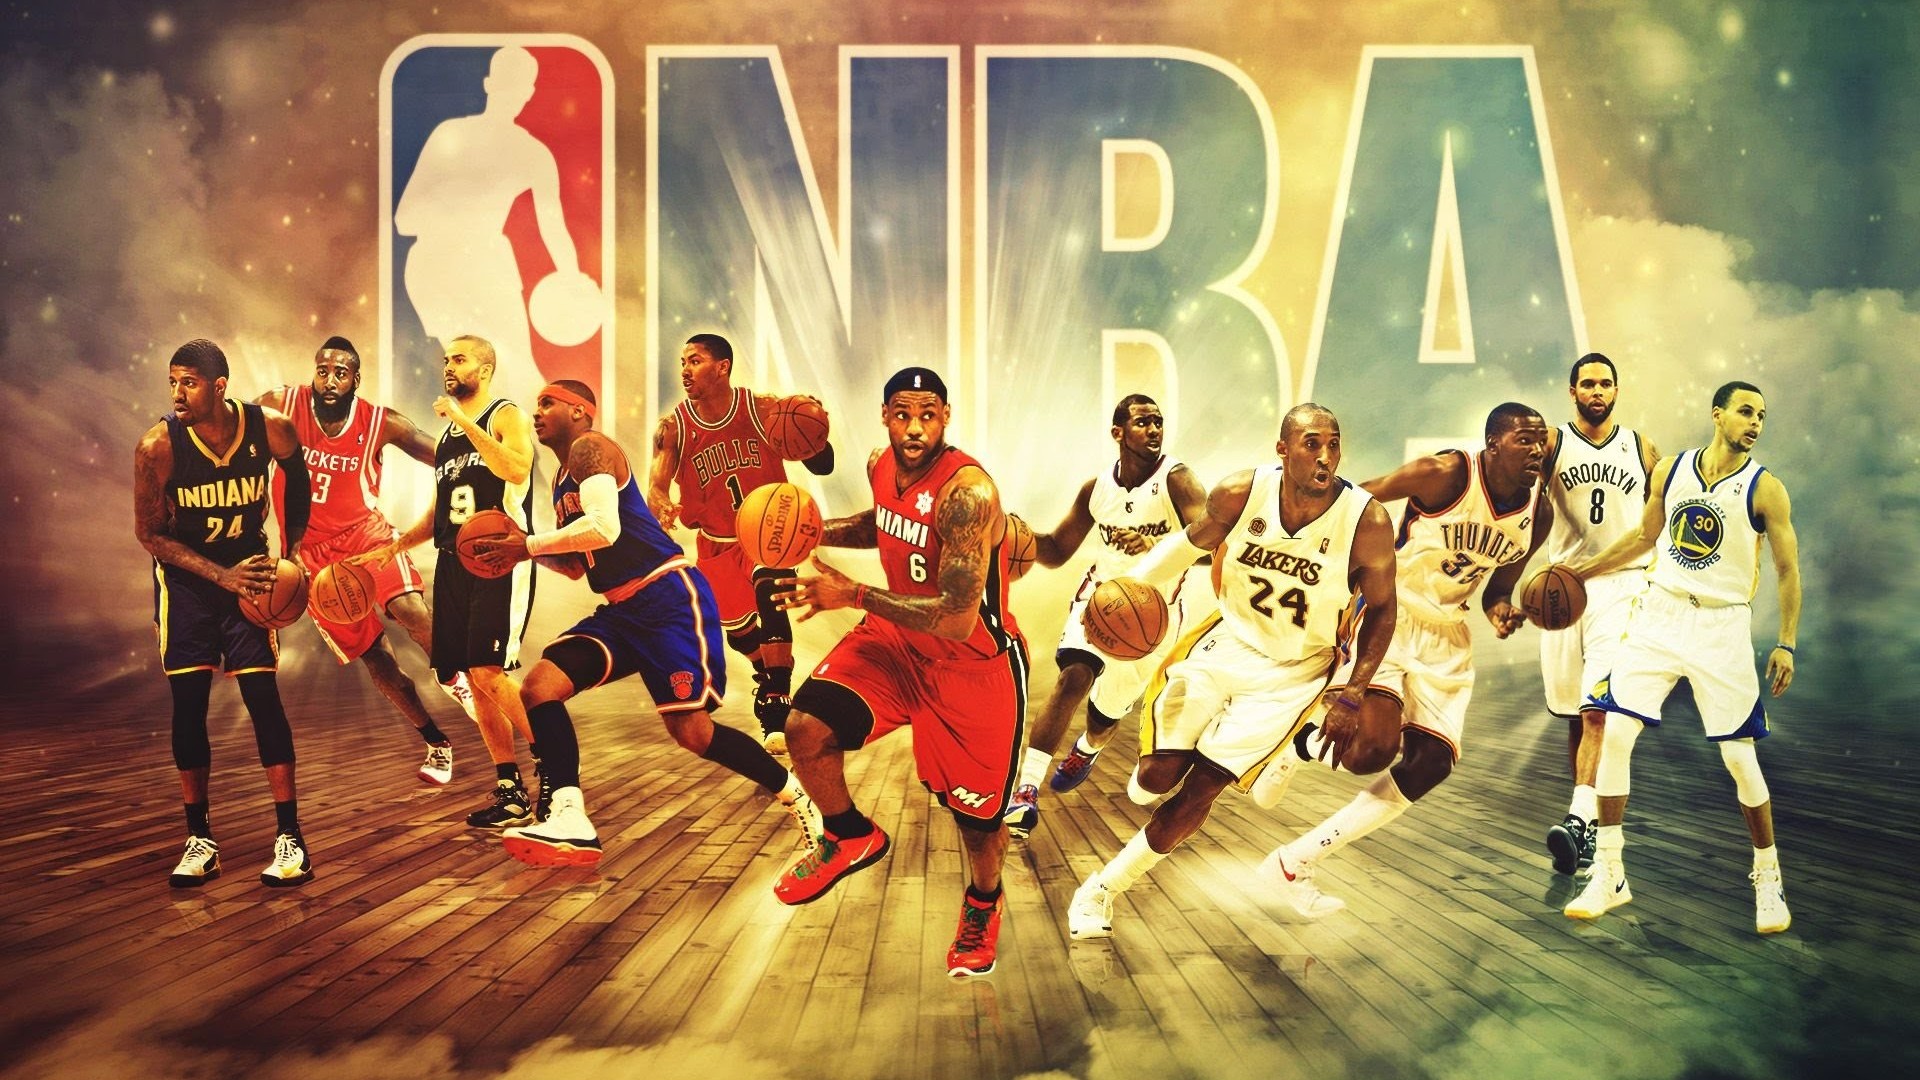 NBA Wallpaper HD with image dimensions 1920x1080 pixel. You can make this wallpaper for your Desktop Computer Backgrounds, Windows or Mac Screensavers, iPhone Lock screen, Tablet or Android and another Mobile Phone device